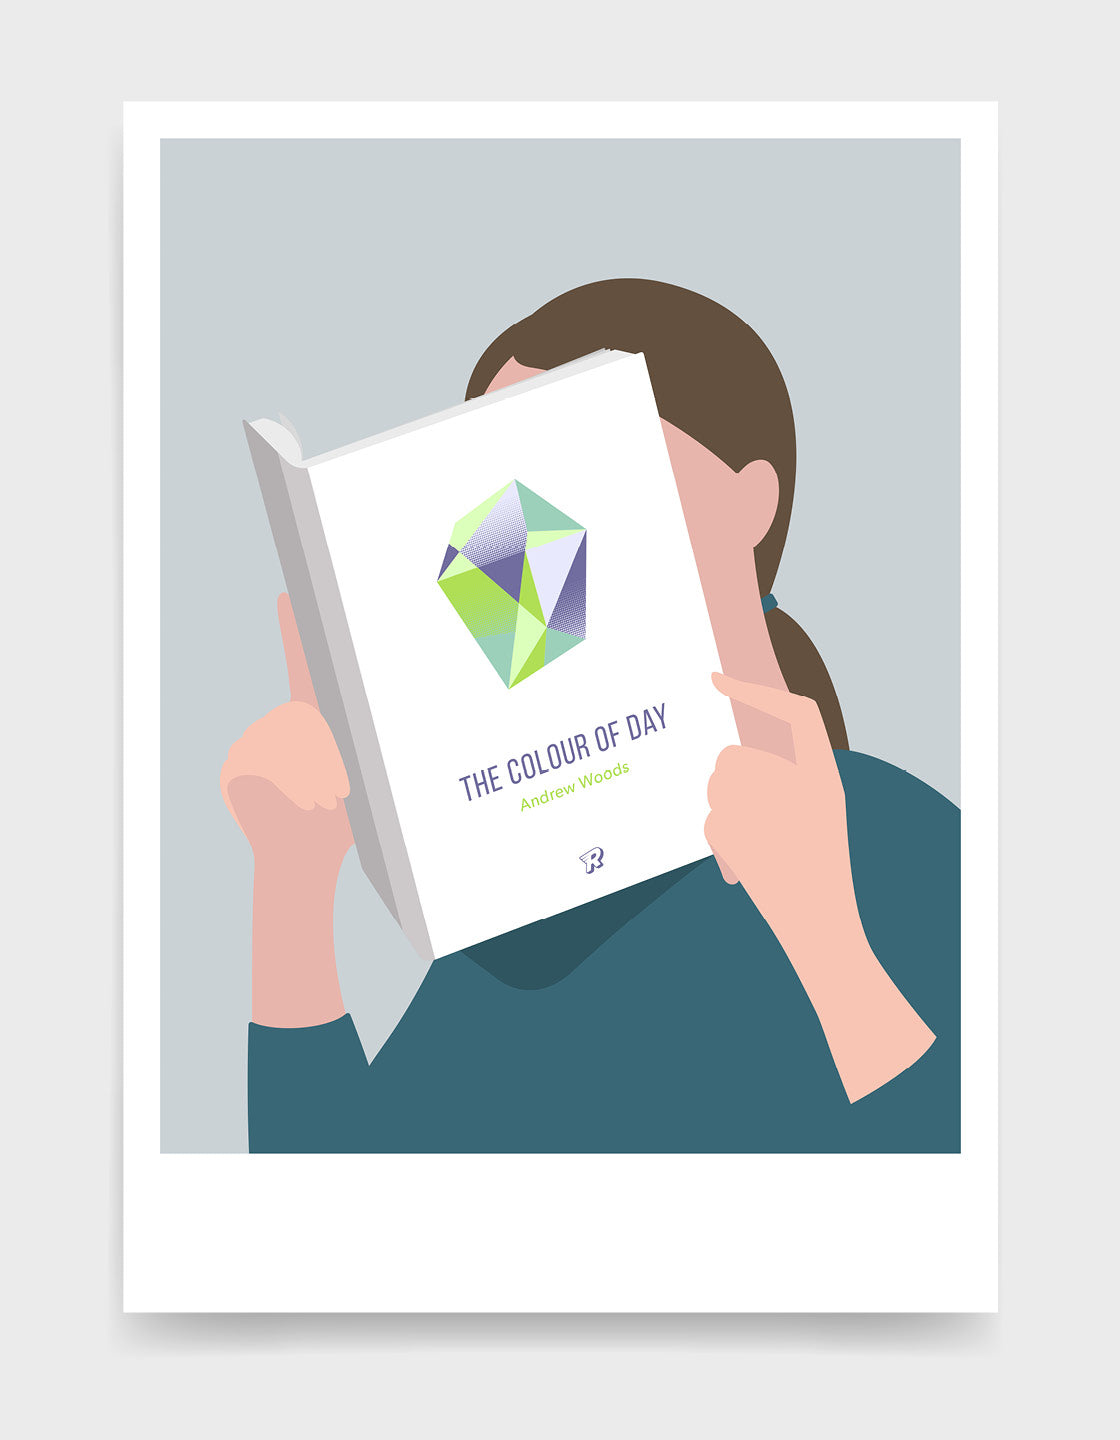 Minimal art print depicting a white person with their head in a book, reading. The book cover can be Personalised, this one has a white design with a large colourful diamond